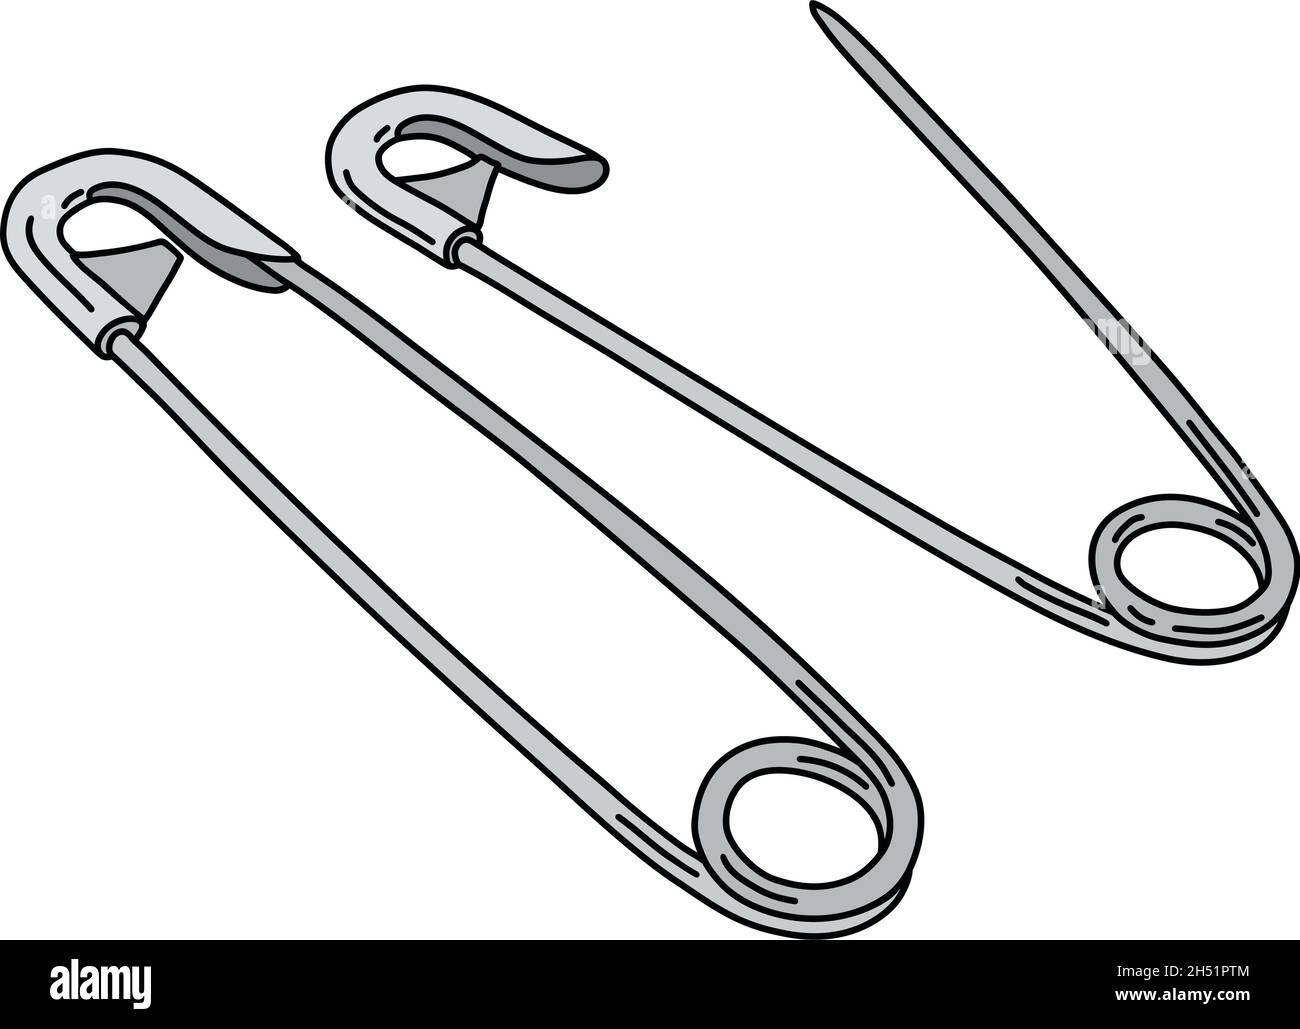 The vectorized hand drawing of two classic steel safety pins Stock